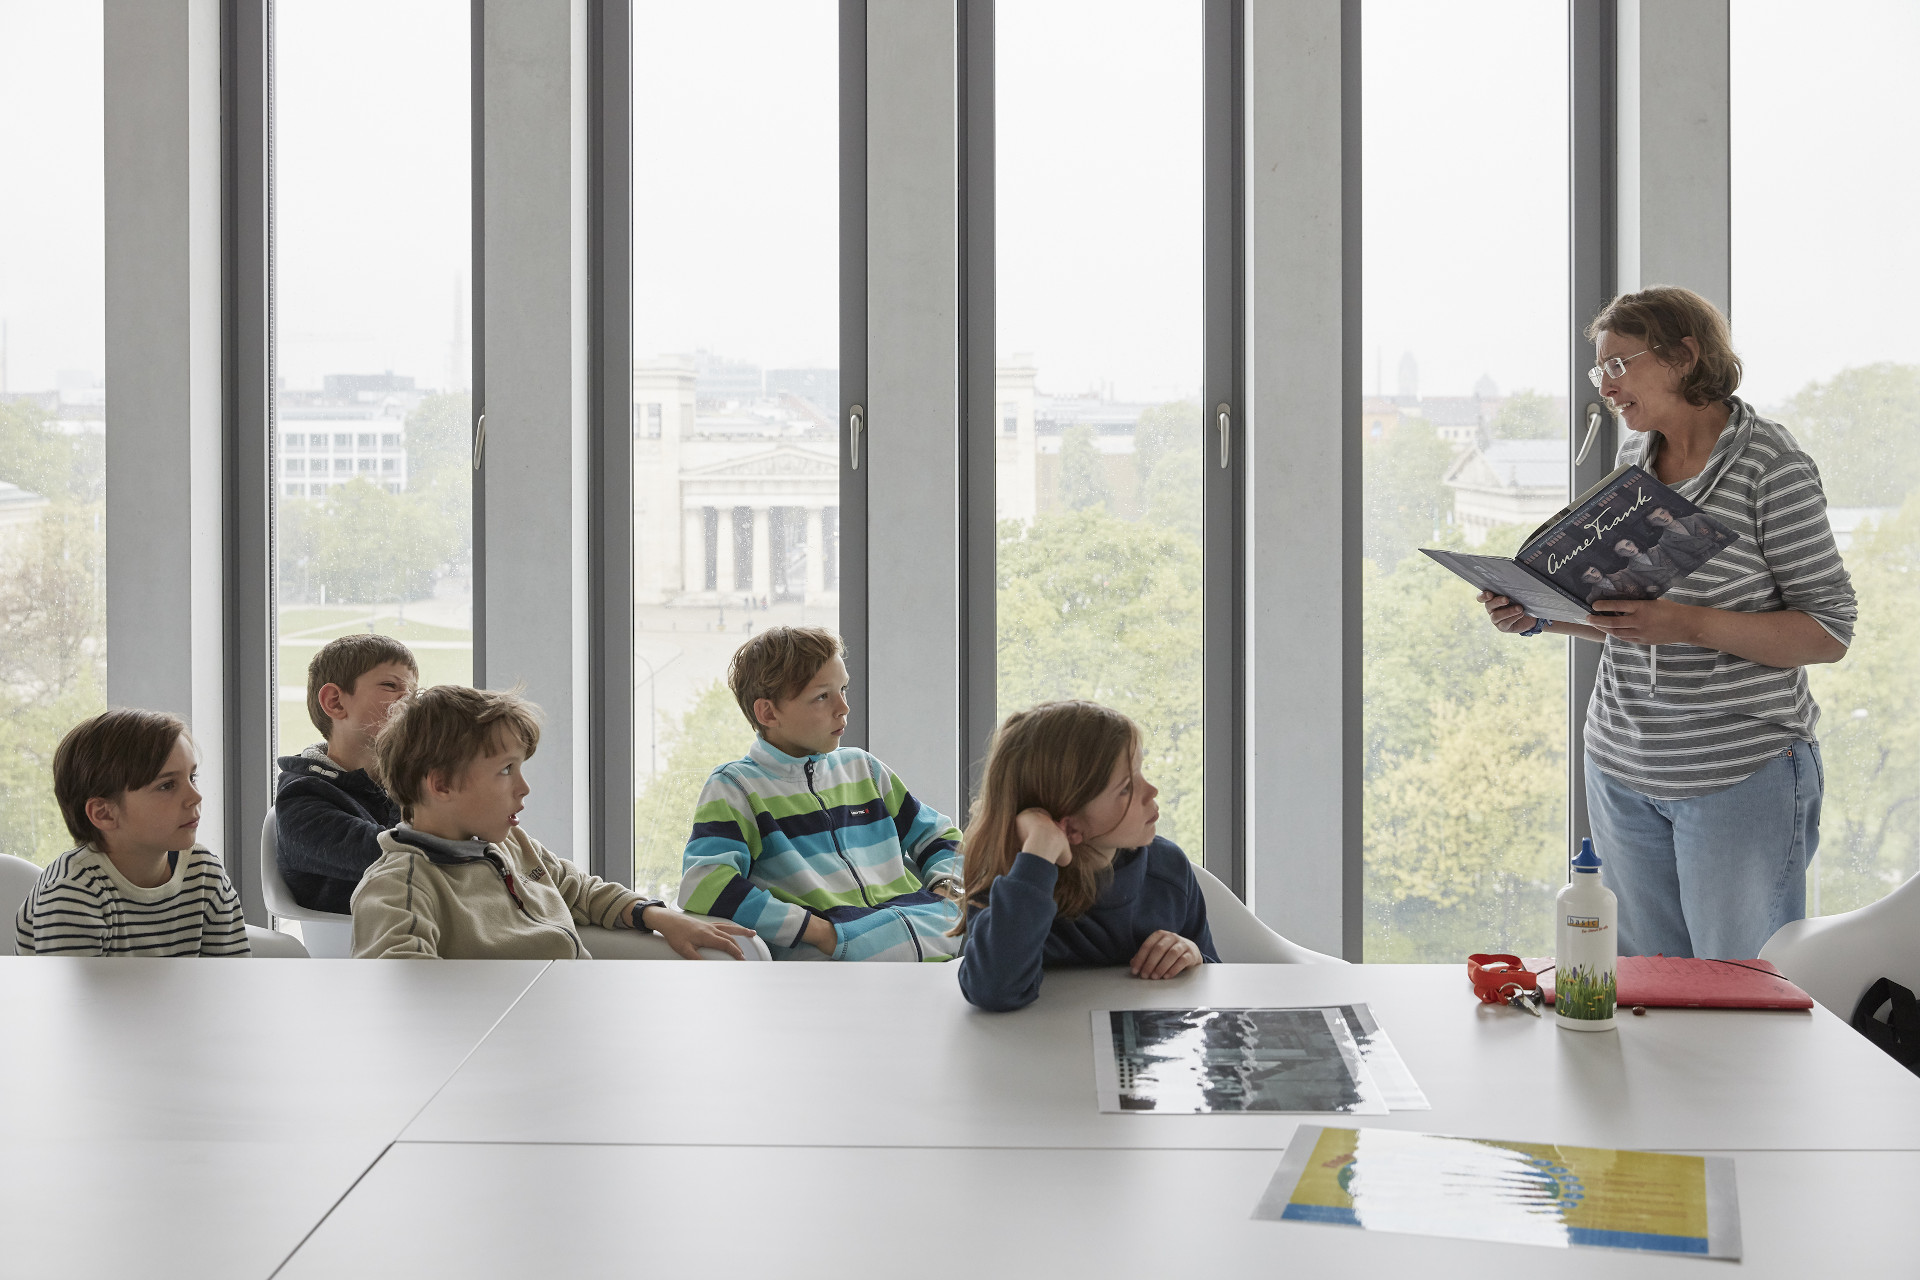 Five children are sitting at a table in a meeting room at the Munich Documentation Center. A member of staff is standing in front of them reading aloud from a book.